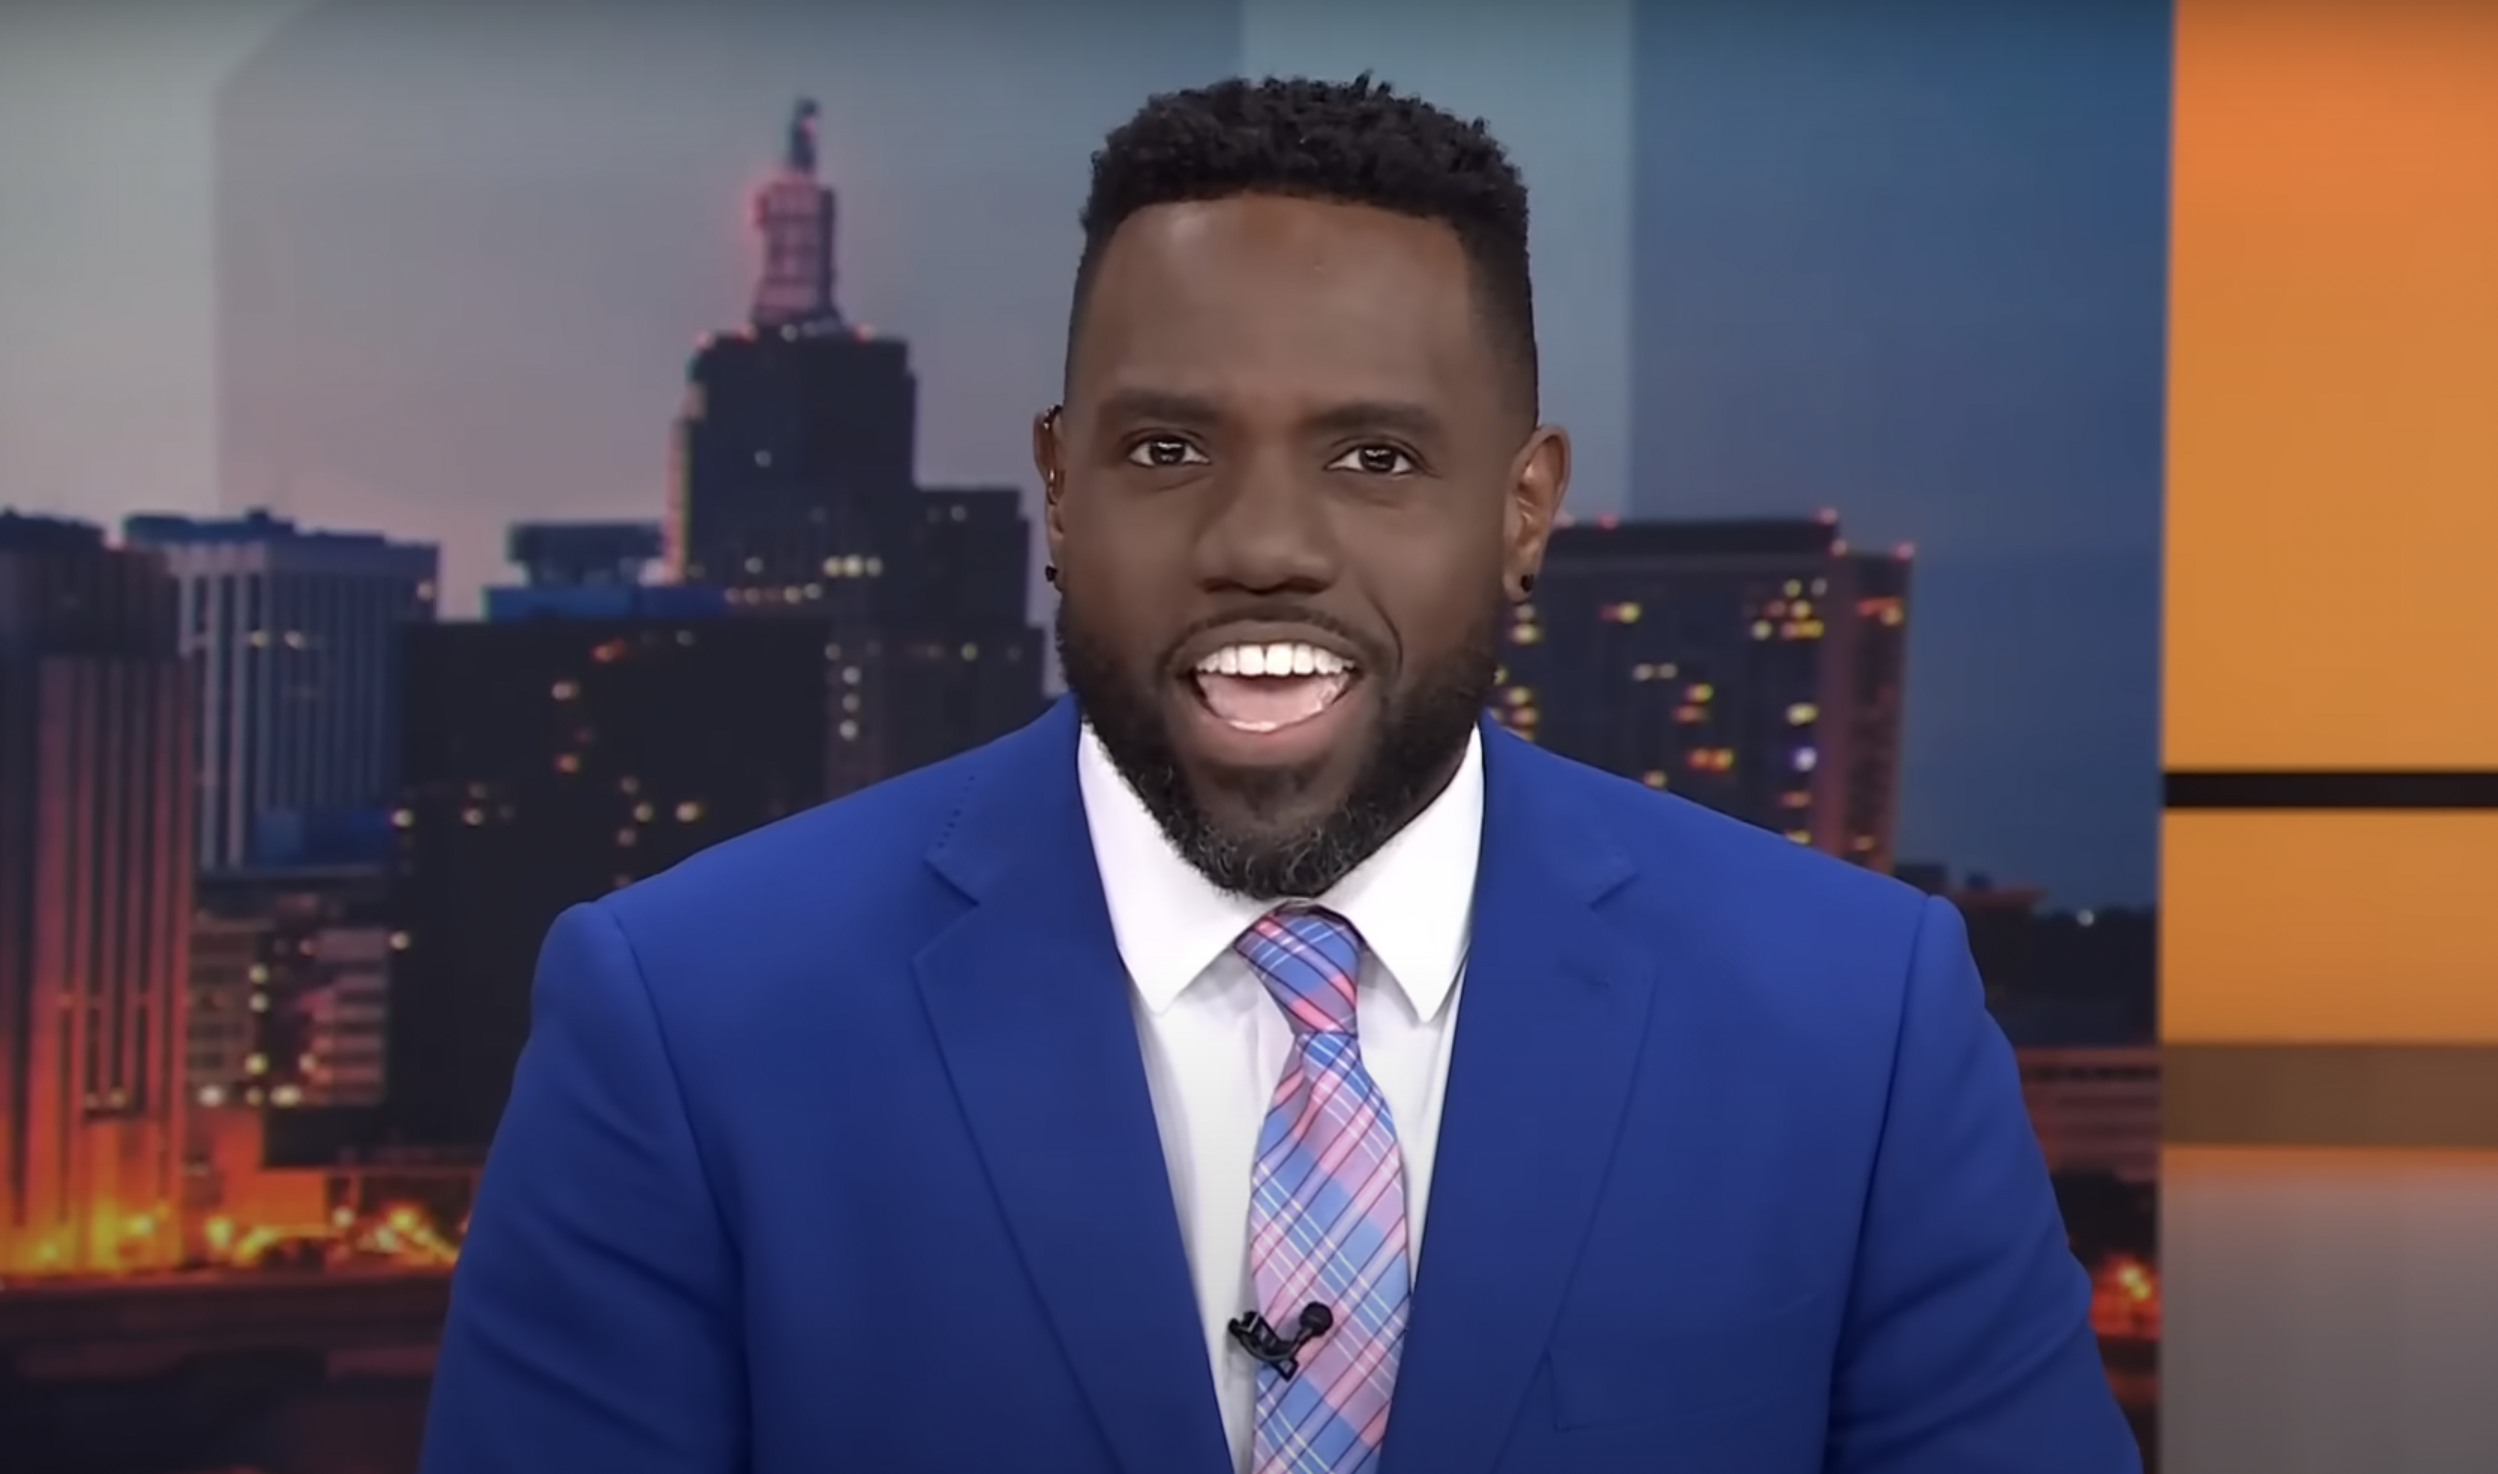 News Anchor Bravely Comes Out As Gay Live On Air